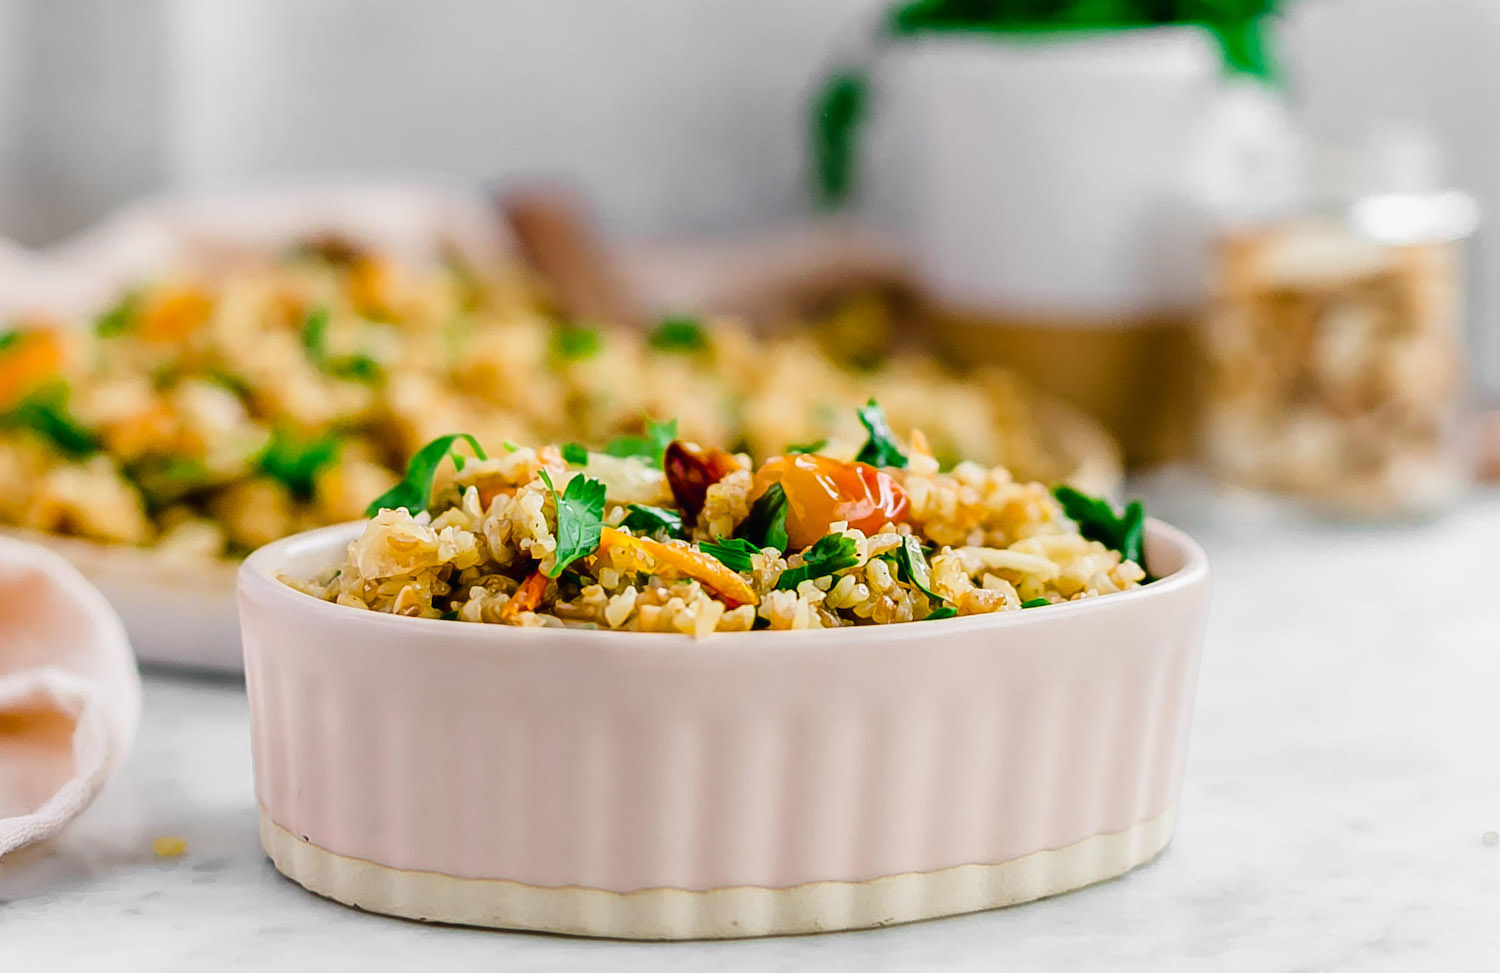 Tomato Almond Toasted Bulgur | Truffles and Trends